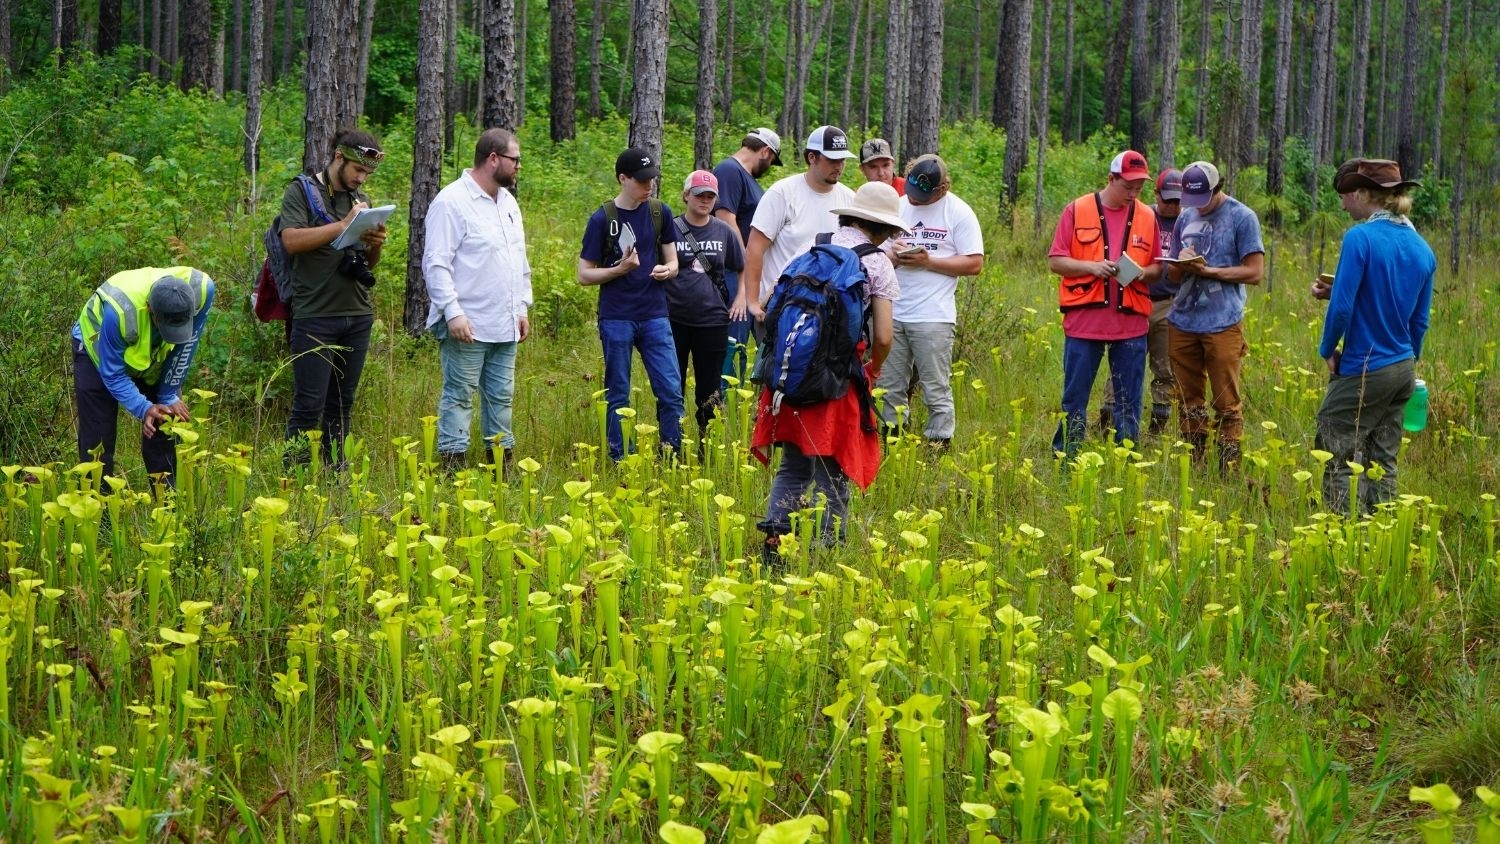 A Summer of Learning, College of Natural Resources, FWCB Summer Camp Pitcher Plants, feature - A Summer of Learning - Forest Biomaterials NC State University